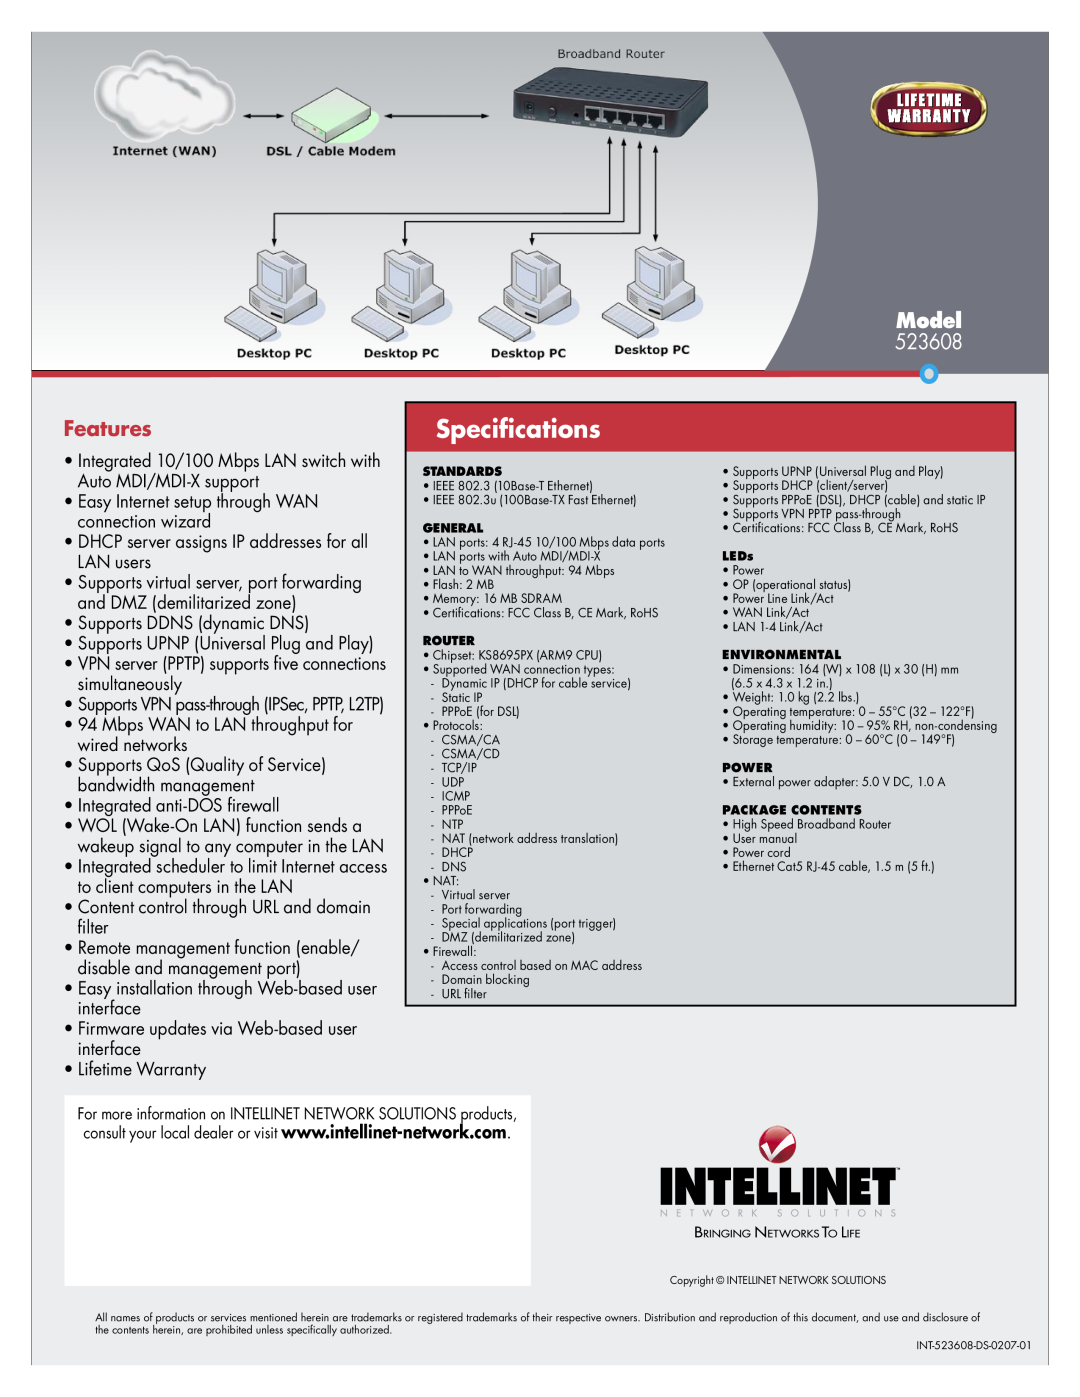 Intellinet Network Solutions 523608 warranty Features, Speciﬁcations, Model 